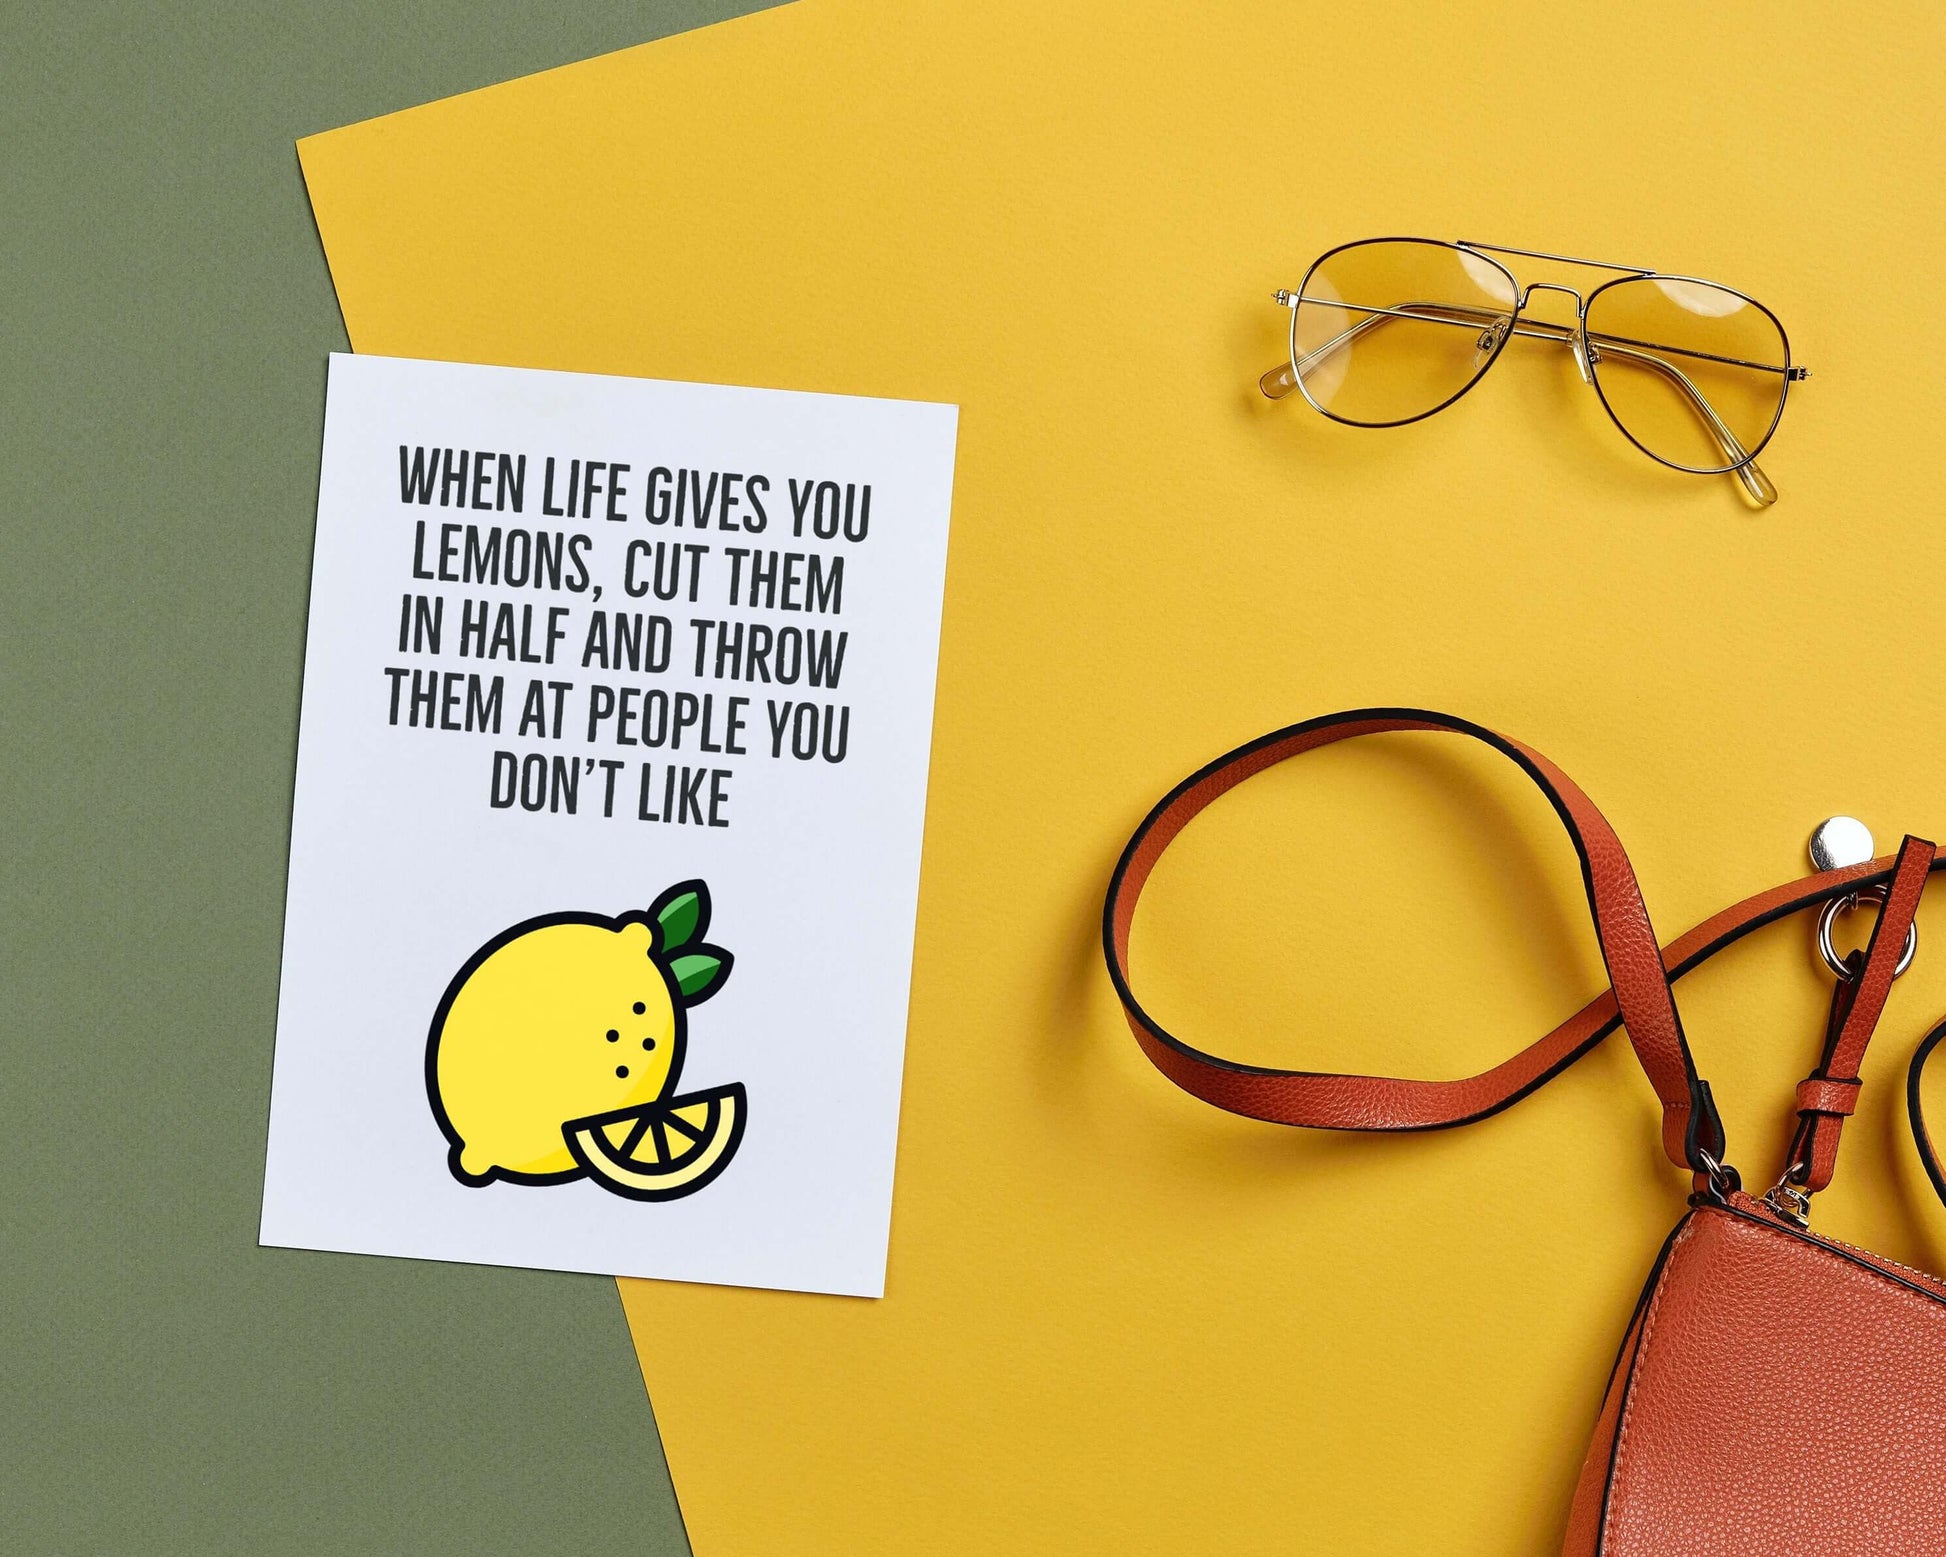 The Card Store UK's When Life Gives You Lemons, Cut Them In Half And Throw Them At People You Don't Like | Funny Lemon Pun Card | Everyday Blank Card, General Cards for £3.50 each